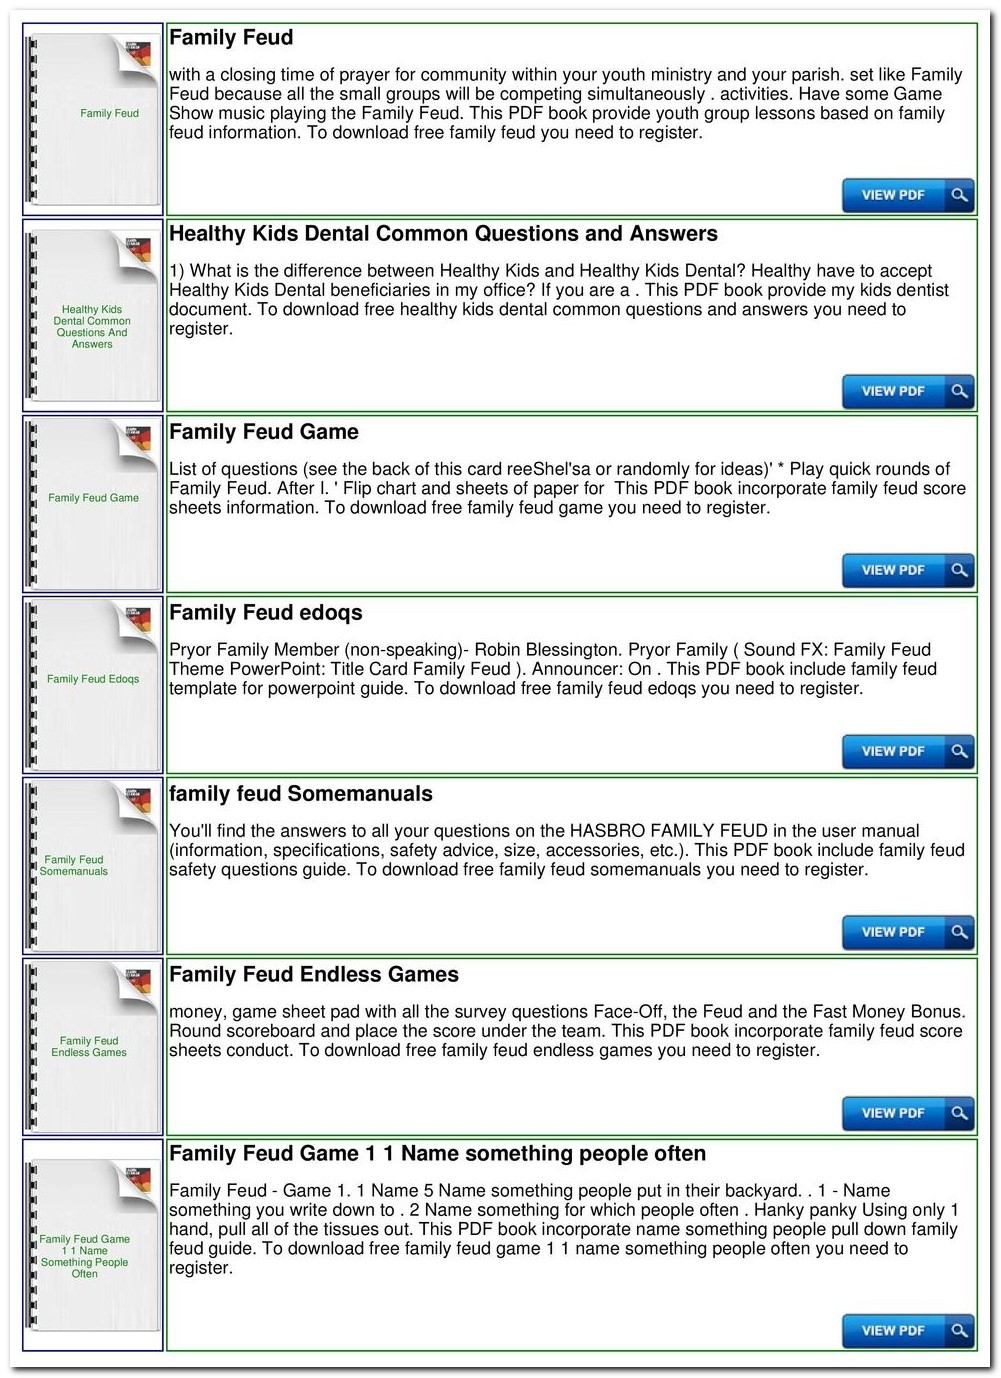 Bible Family Feud Questions And Answers Printable Free - Free Bible Questions And Answers Printable